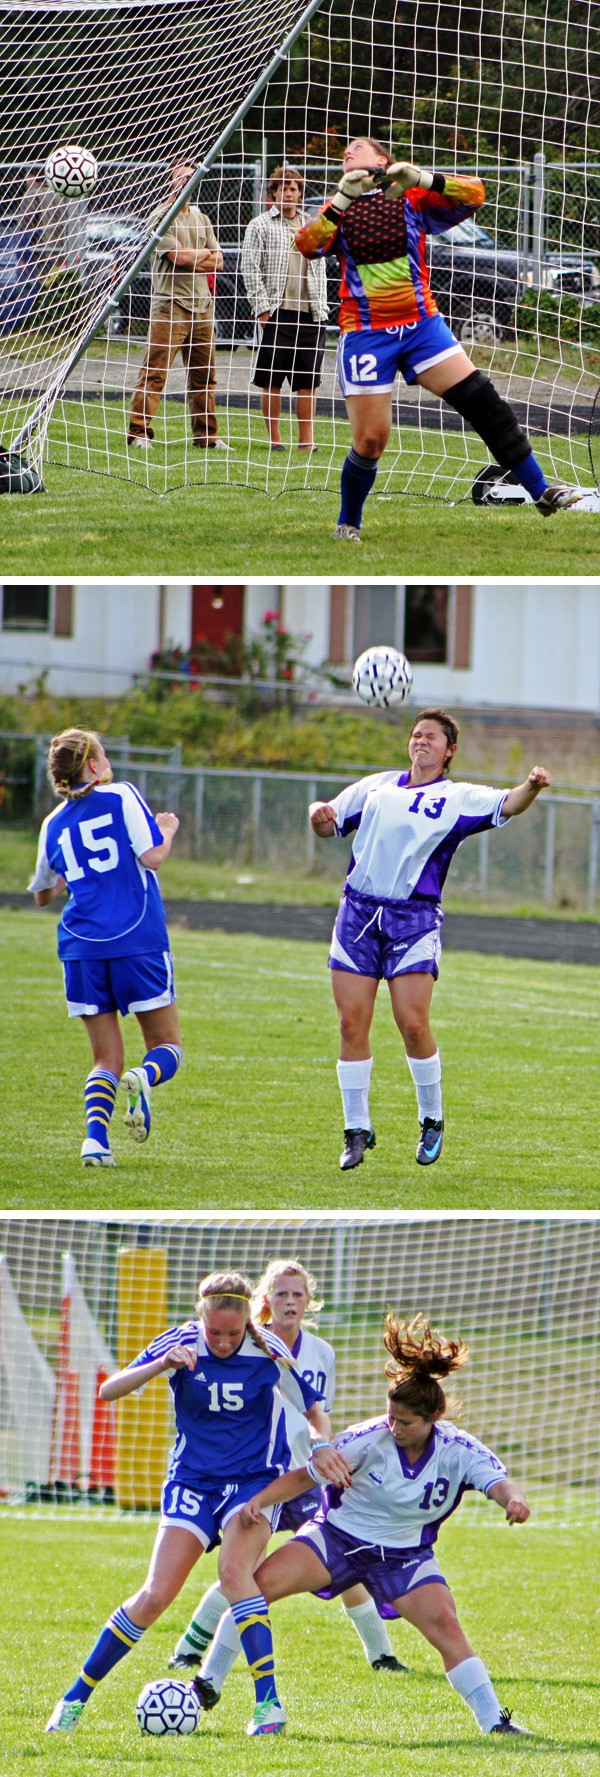 Top photo: A shot by Friday Harbor senior Hannah Starr gets by South Whidbey's goalie